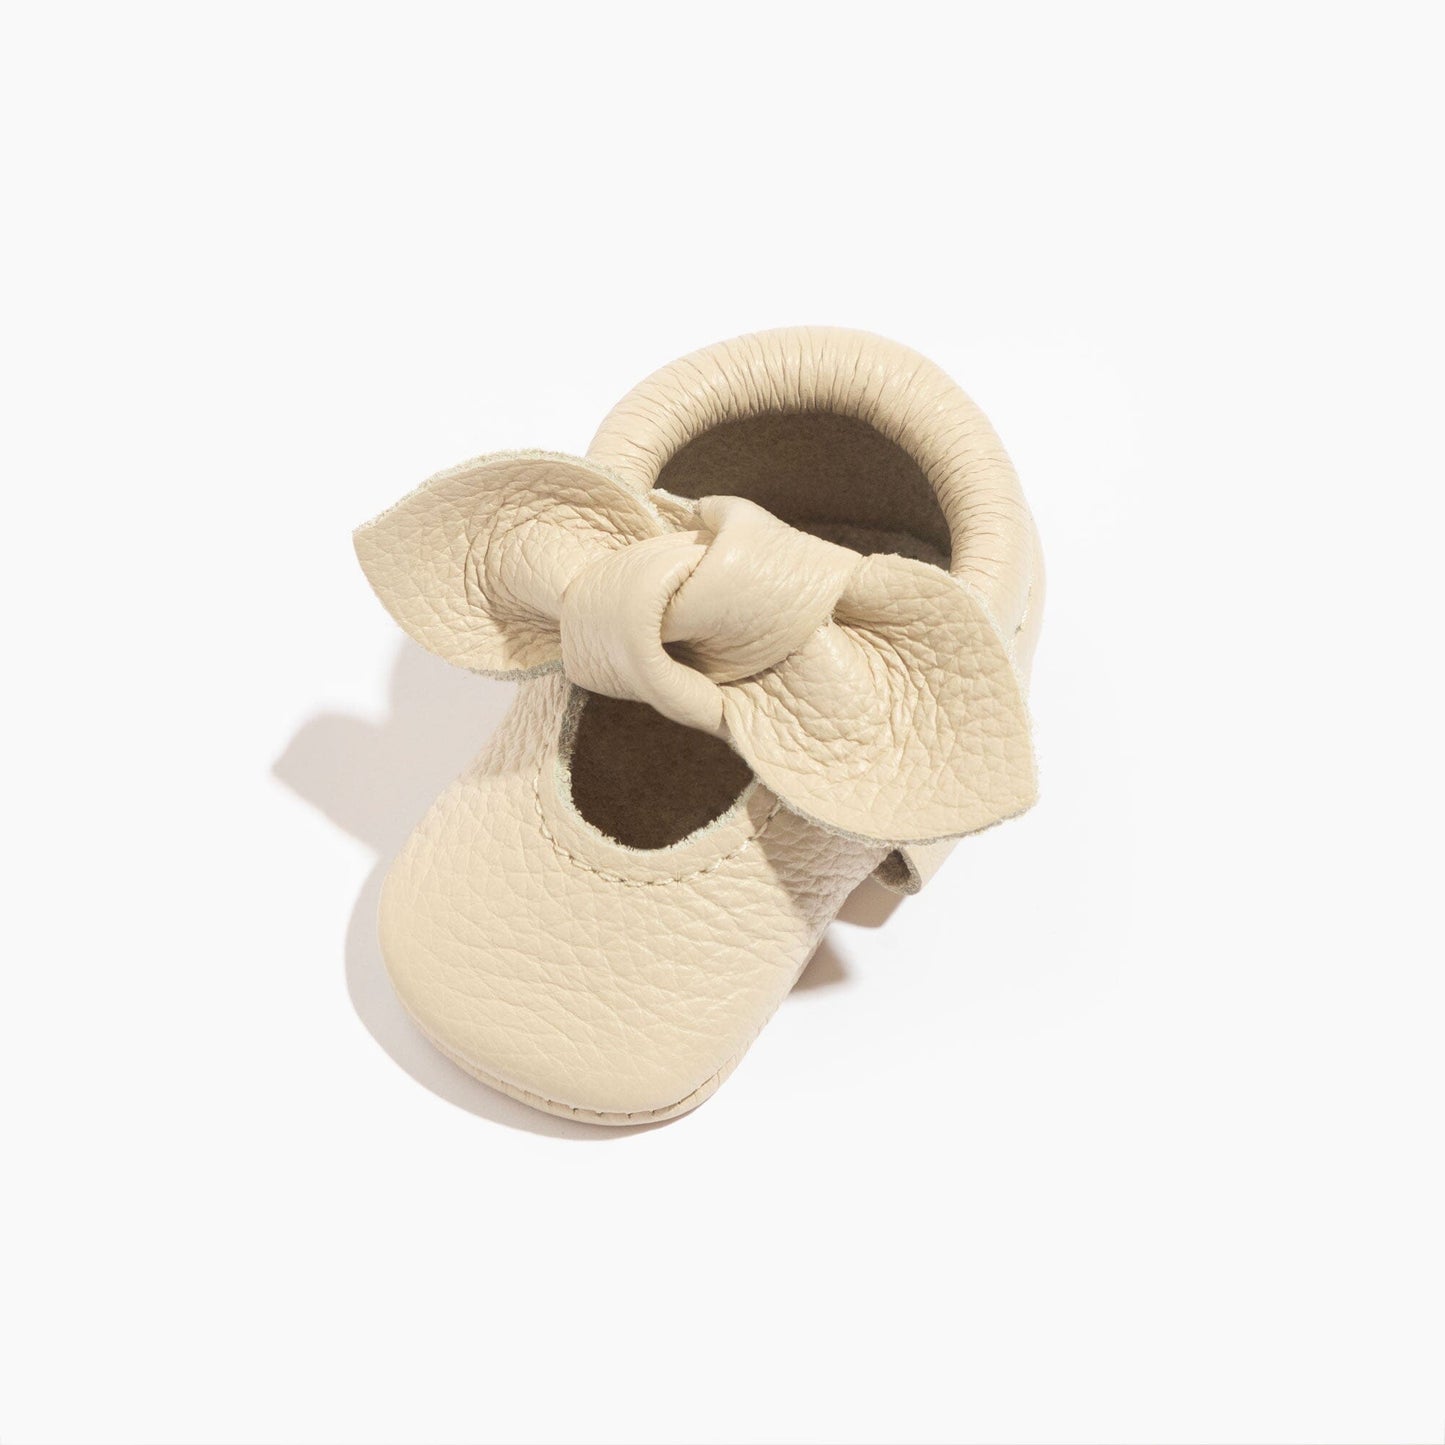 Newborn Birch Knotted Bow Baby Shoe Knotted Bow Mocc Newborn 